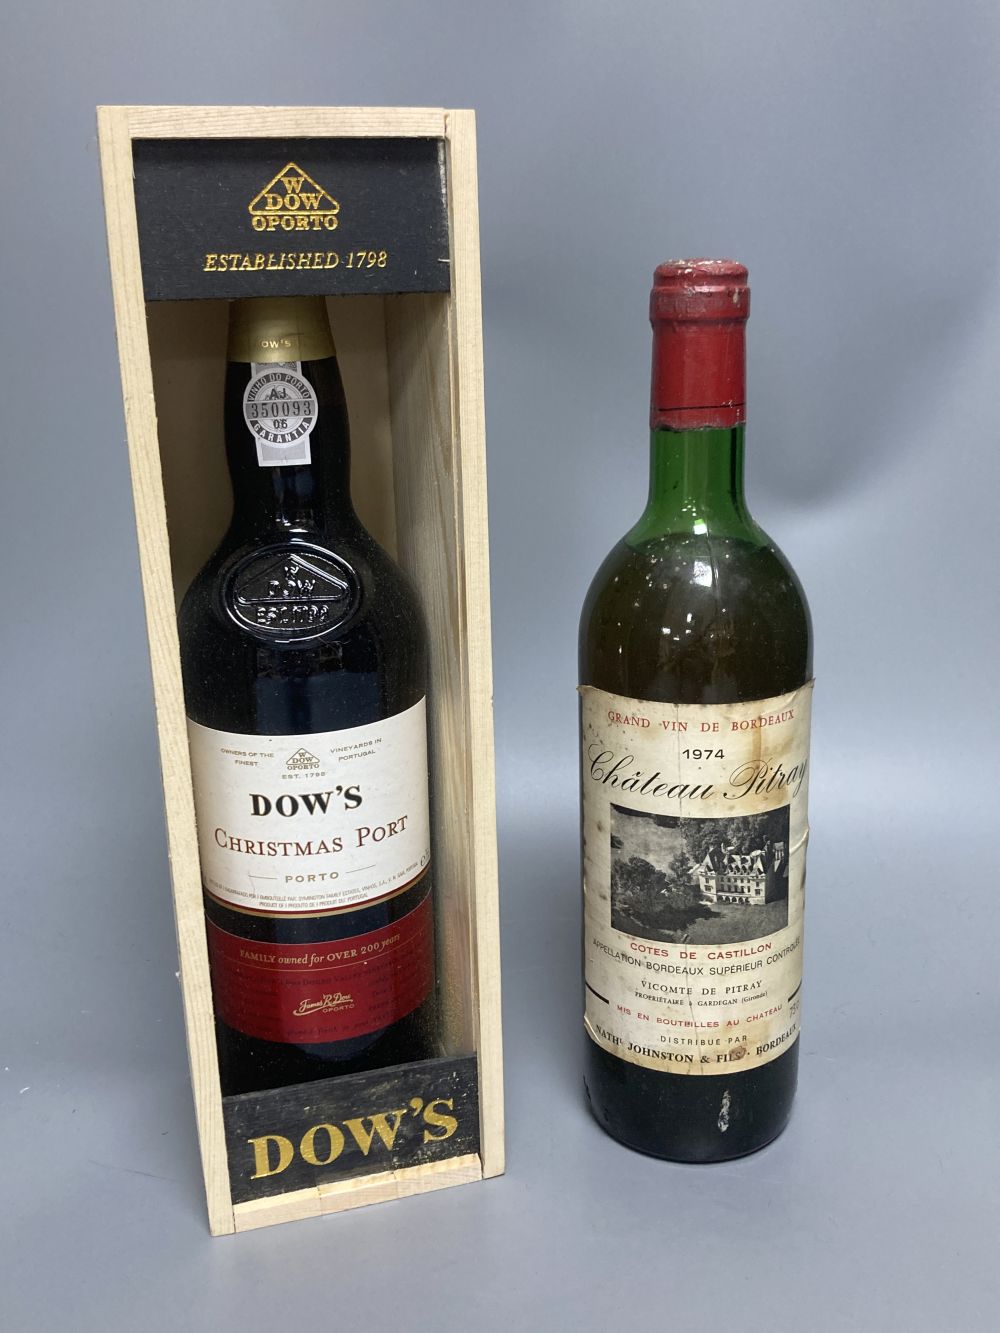 One bottle of Dows Christmas Port and a bottle of Chateau Pitray 1974